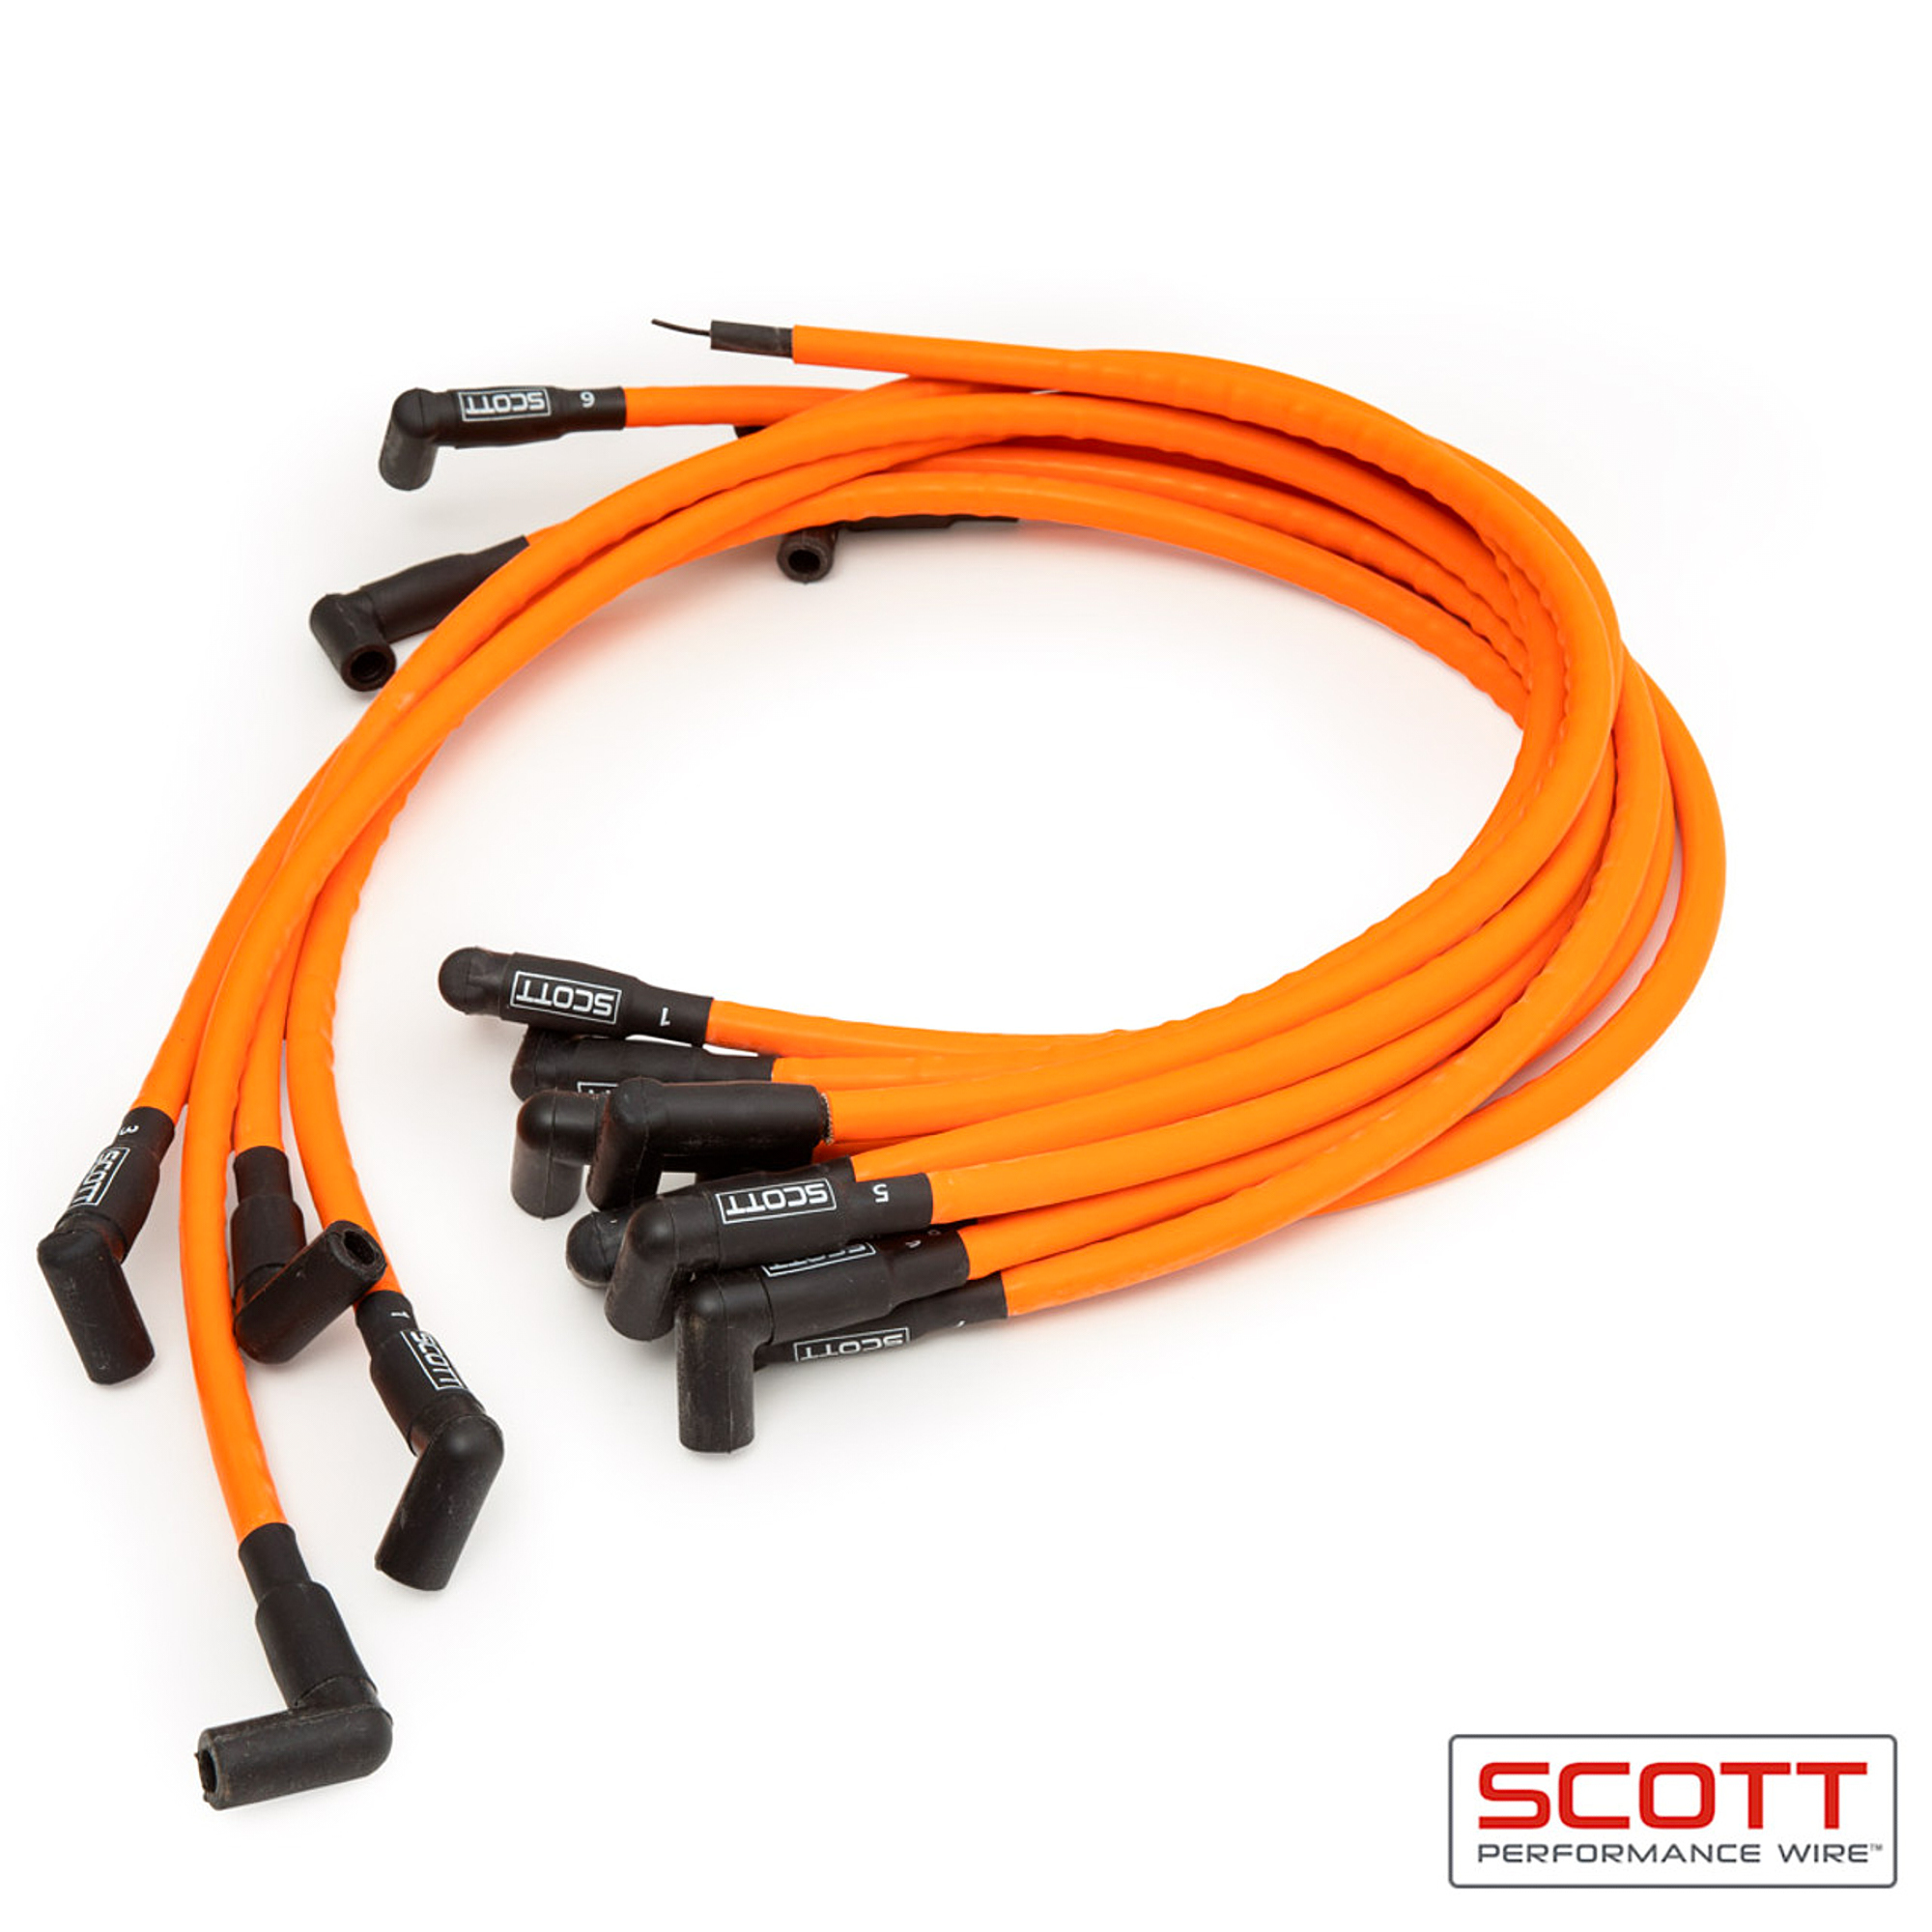 Scott Performance Wire CH-402-5 Spark Plug Wire Set, High Performance, Spiral Core, 10 mm, Orange, 90 Degree Plug Boots, HEI Style, Over Headers, Small Block Chevy, Kit